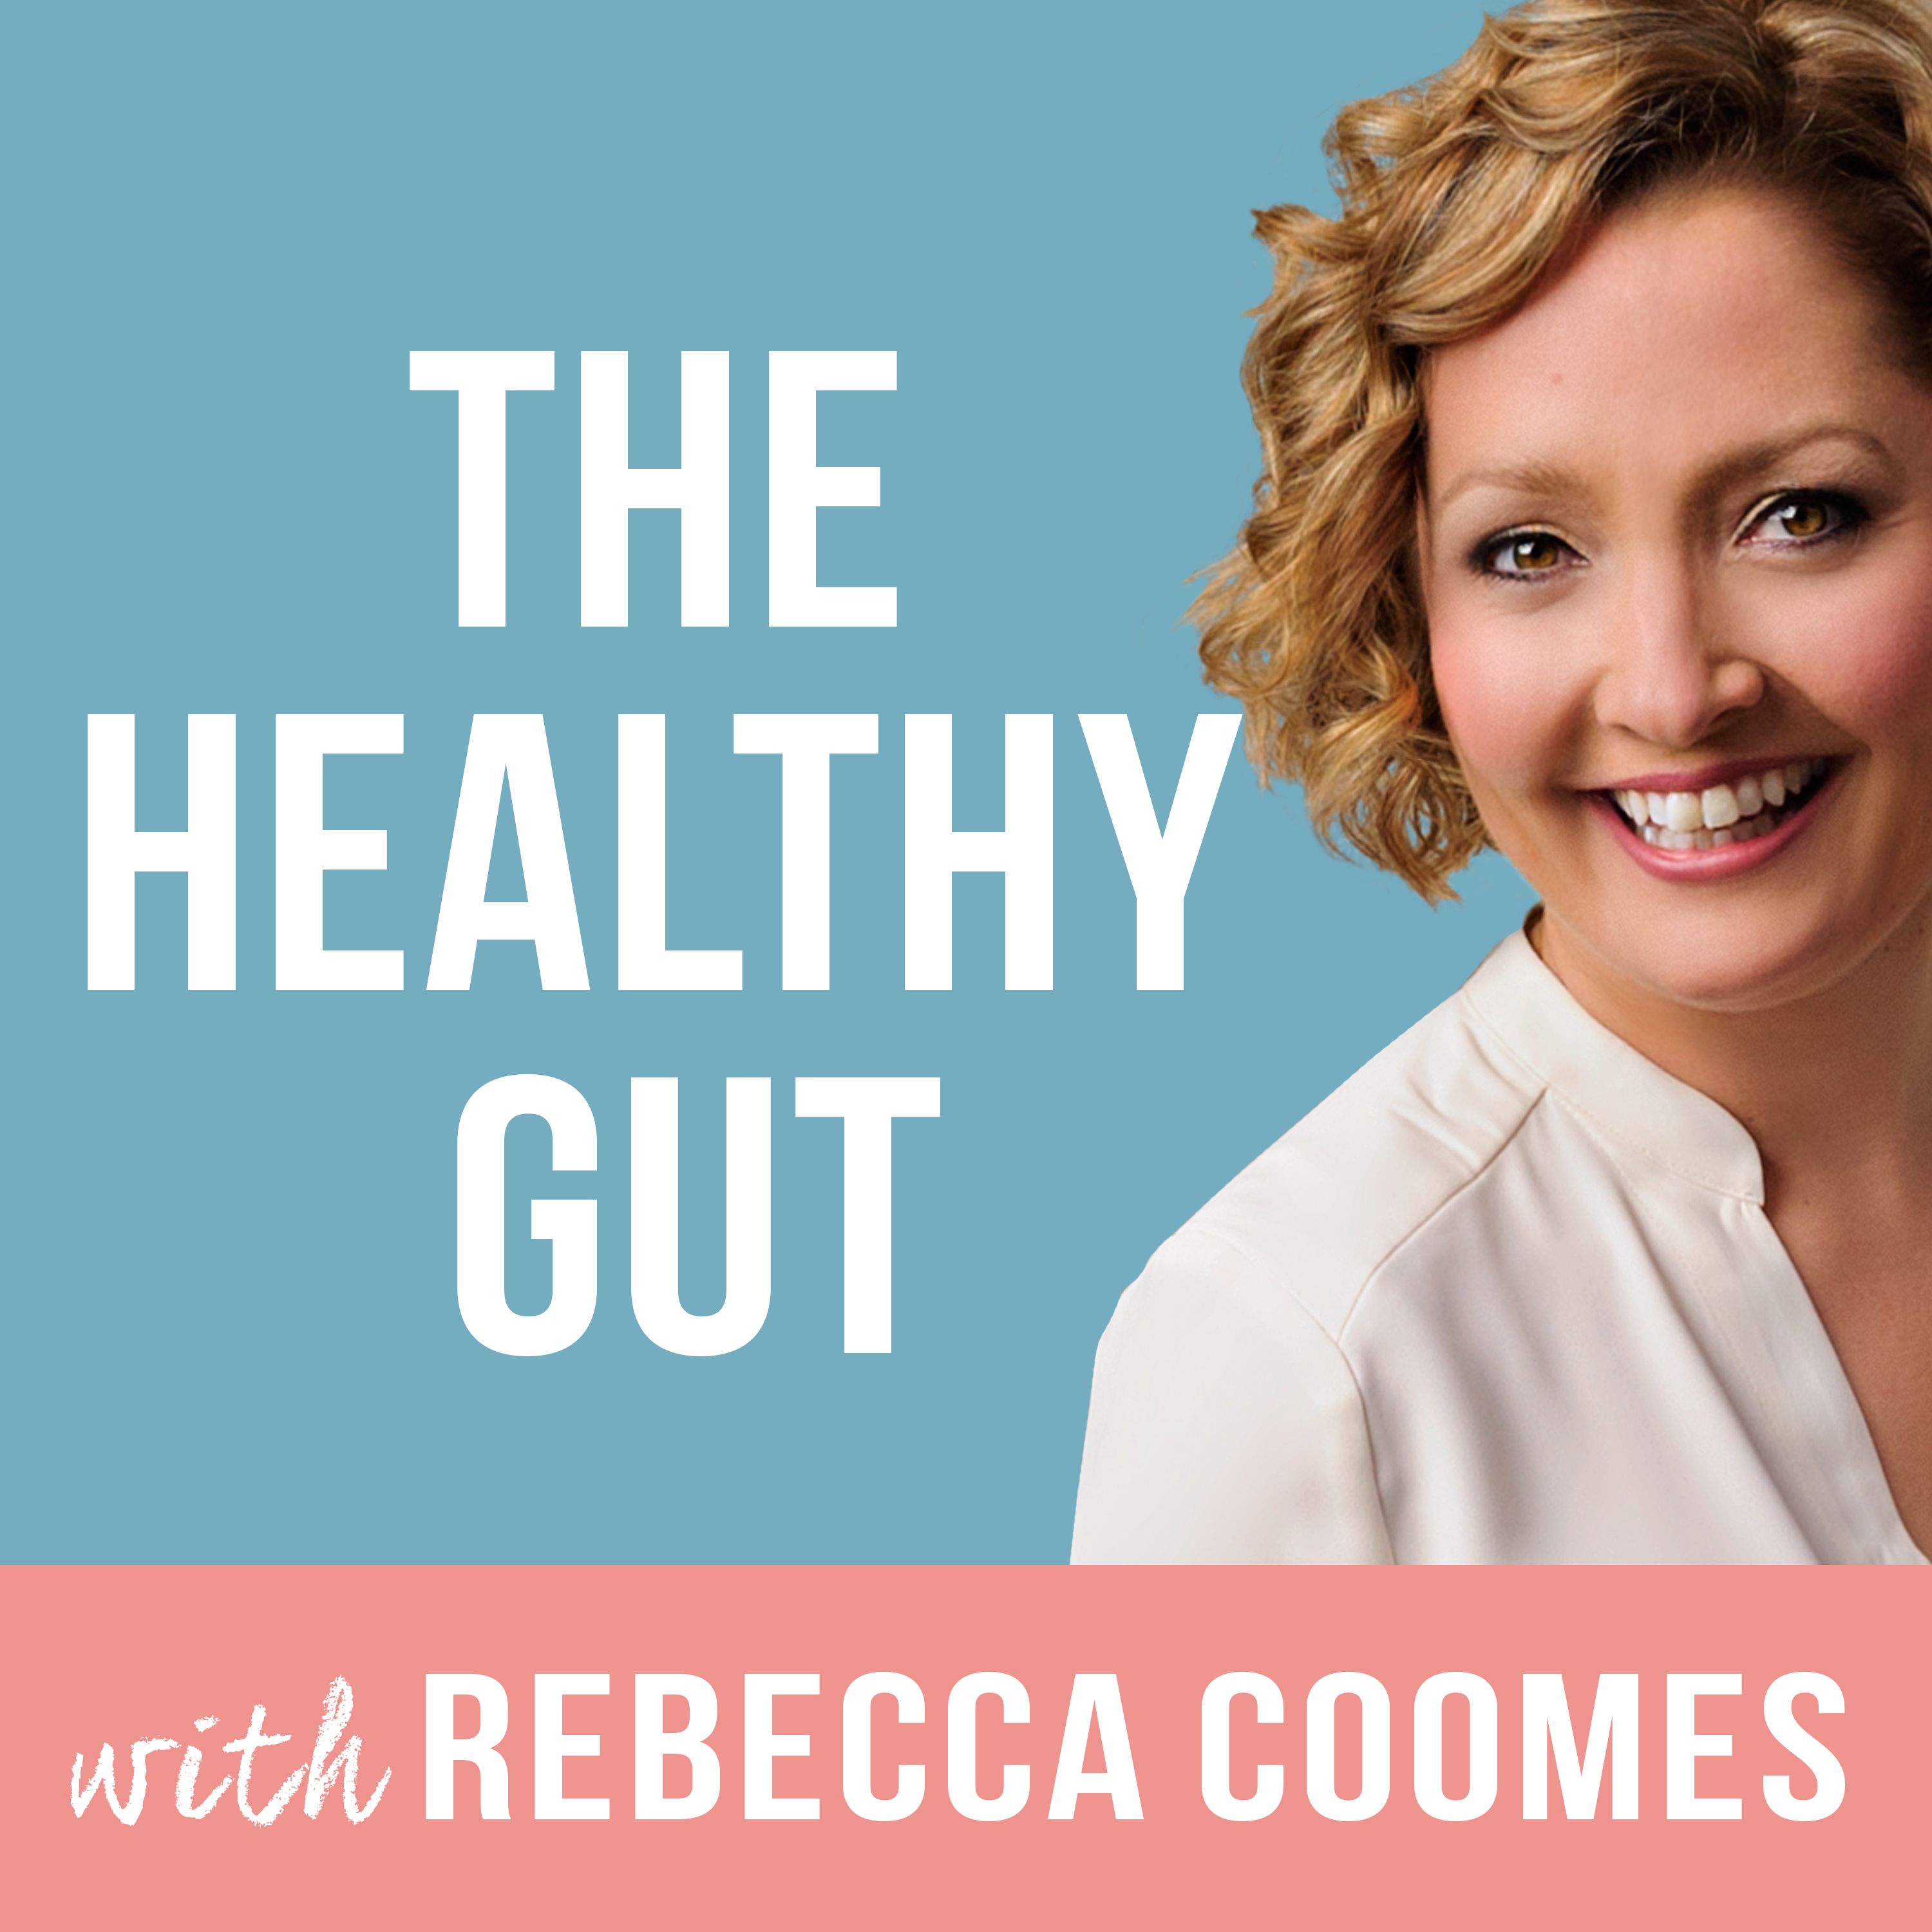 The Healthy Gut Podcast is back for Season 2!